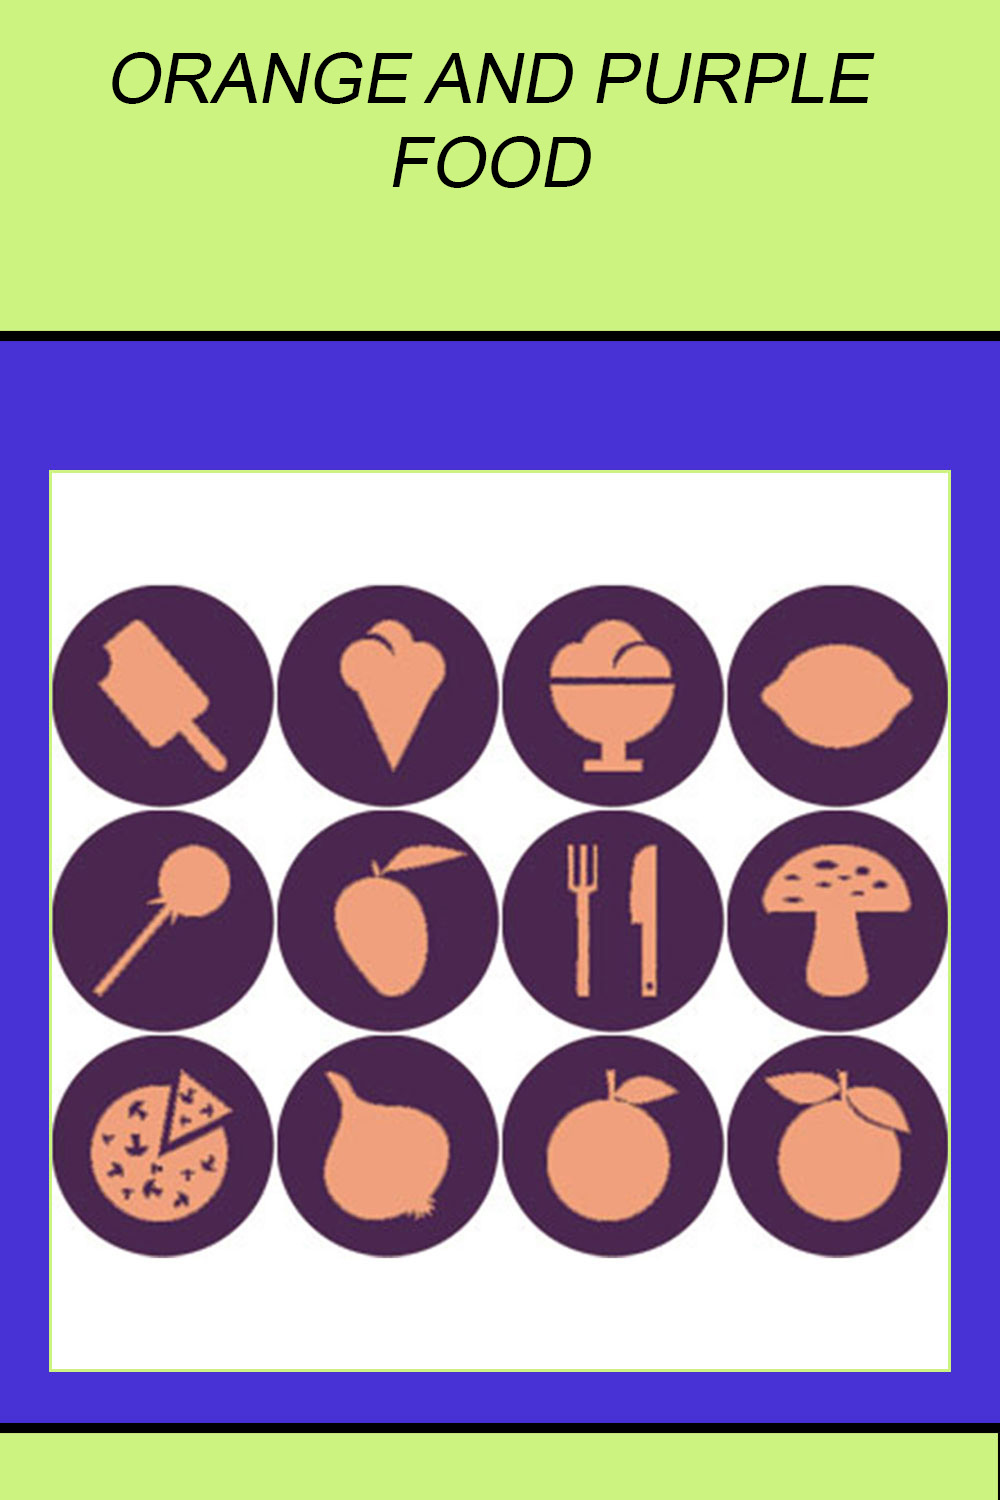 ORANGE AND PURPLE FOOD ROUND ICONS pinterest preview image.